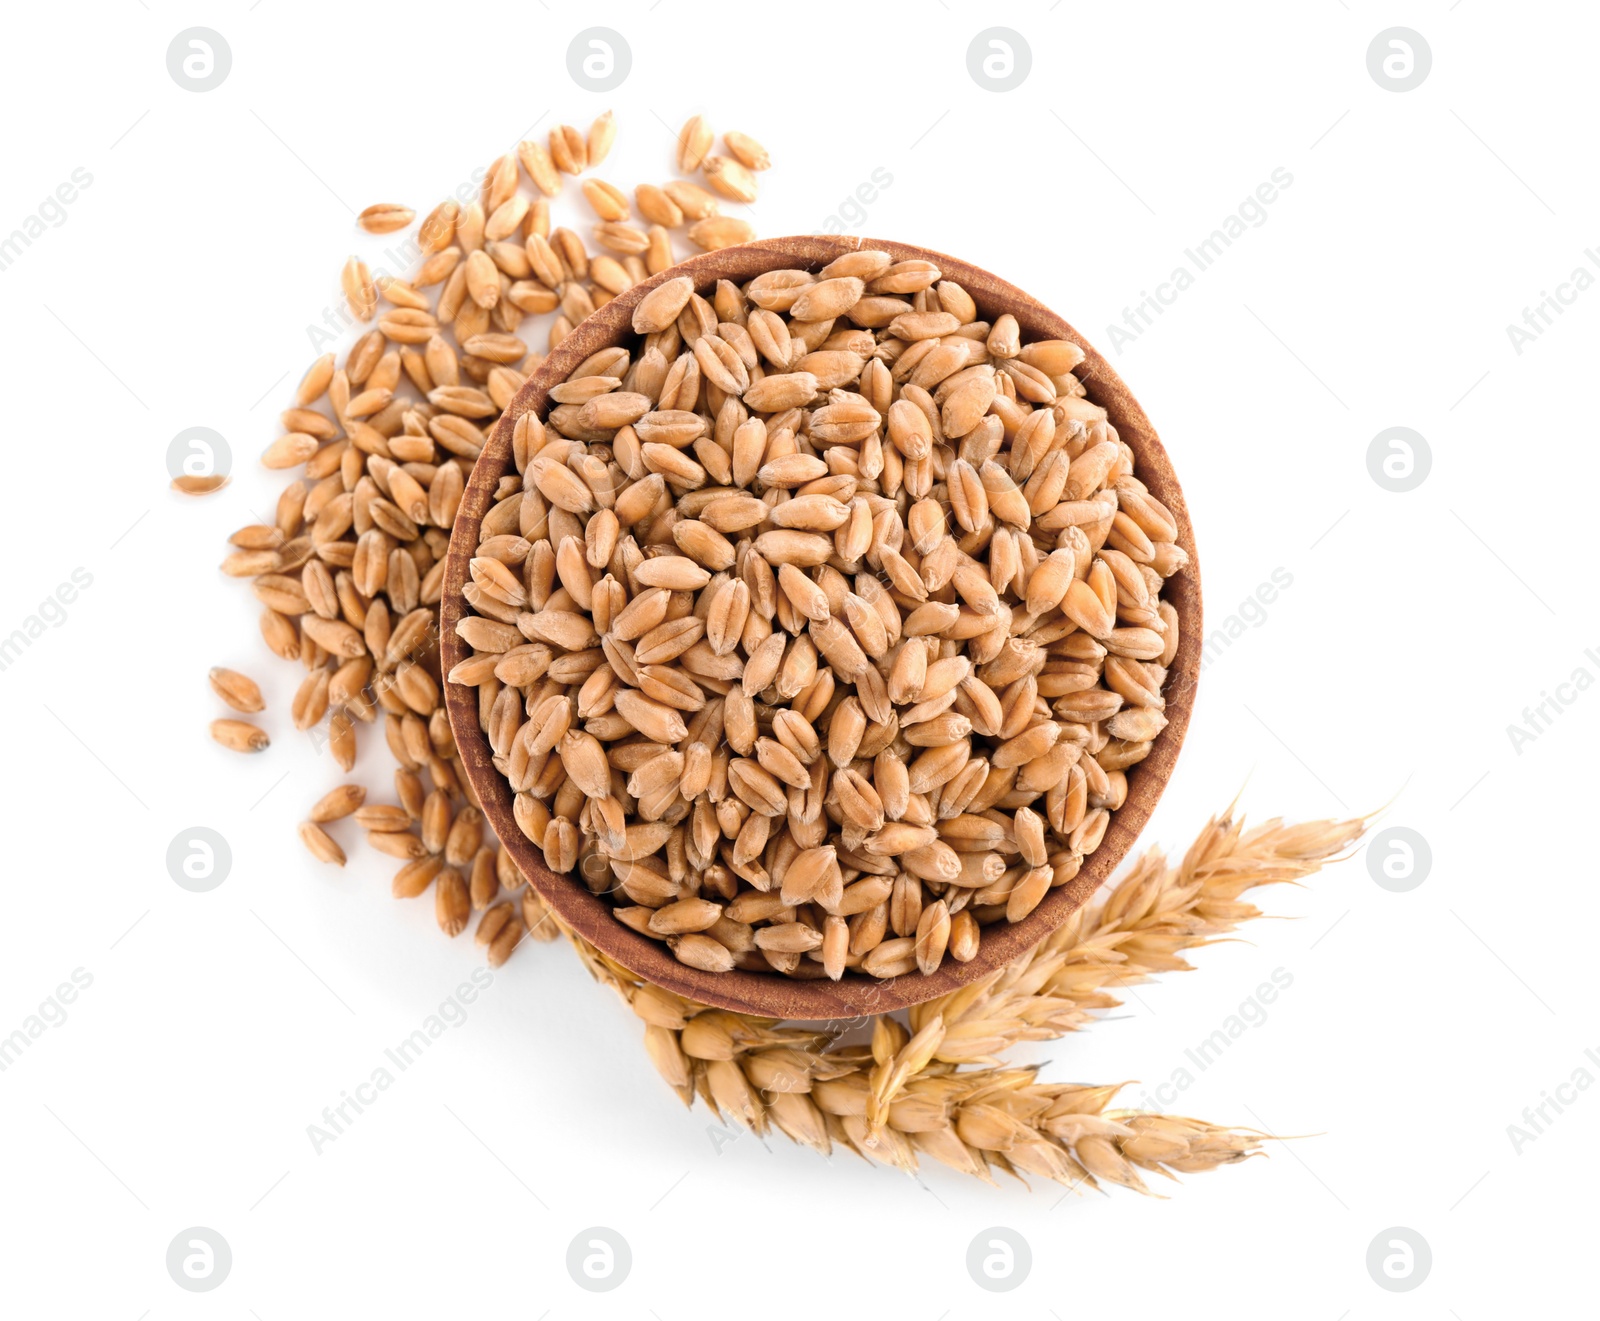 Photo of Wooden bowl with wheat grains and spikes on white background, top view